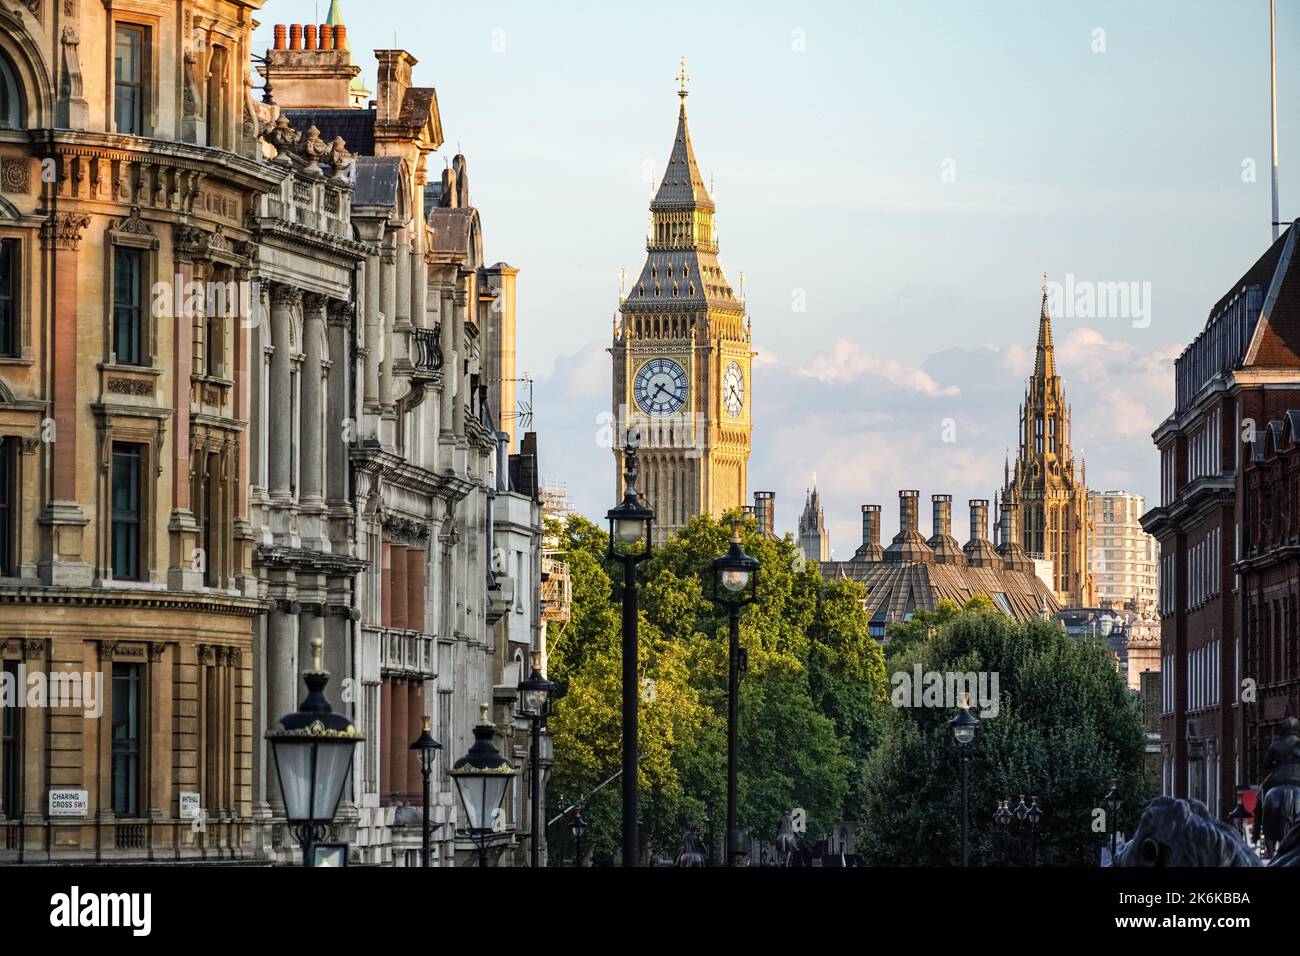 The Elizabeth Tower, Big Ben clock tower and historic buildings in Westminster, London England United Kingdom UK Stock Photo